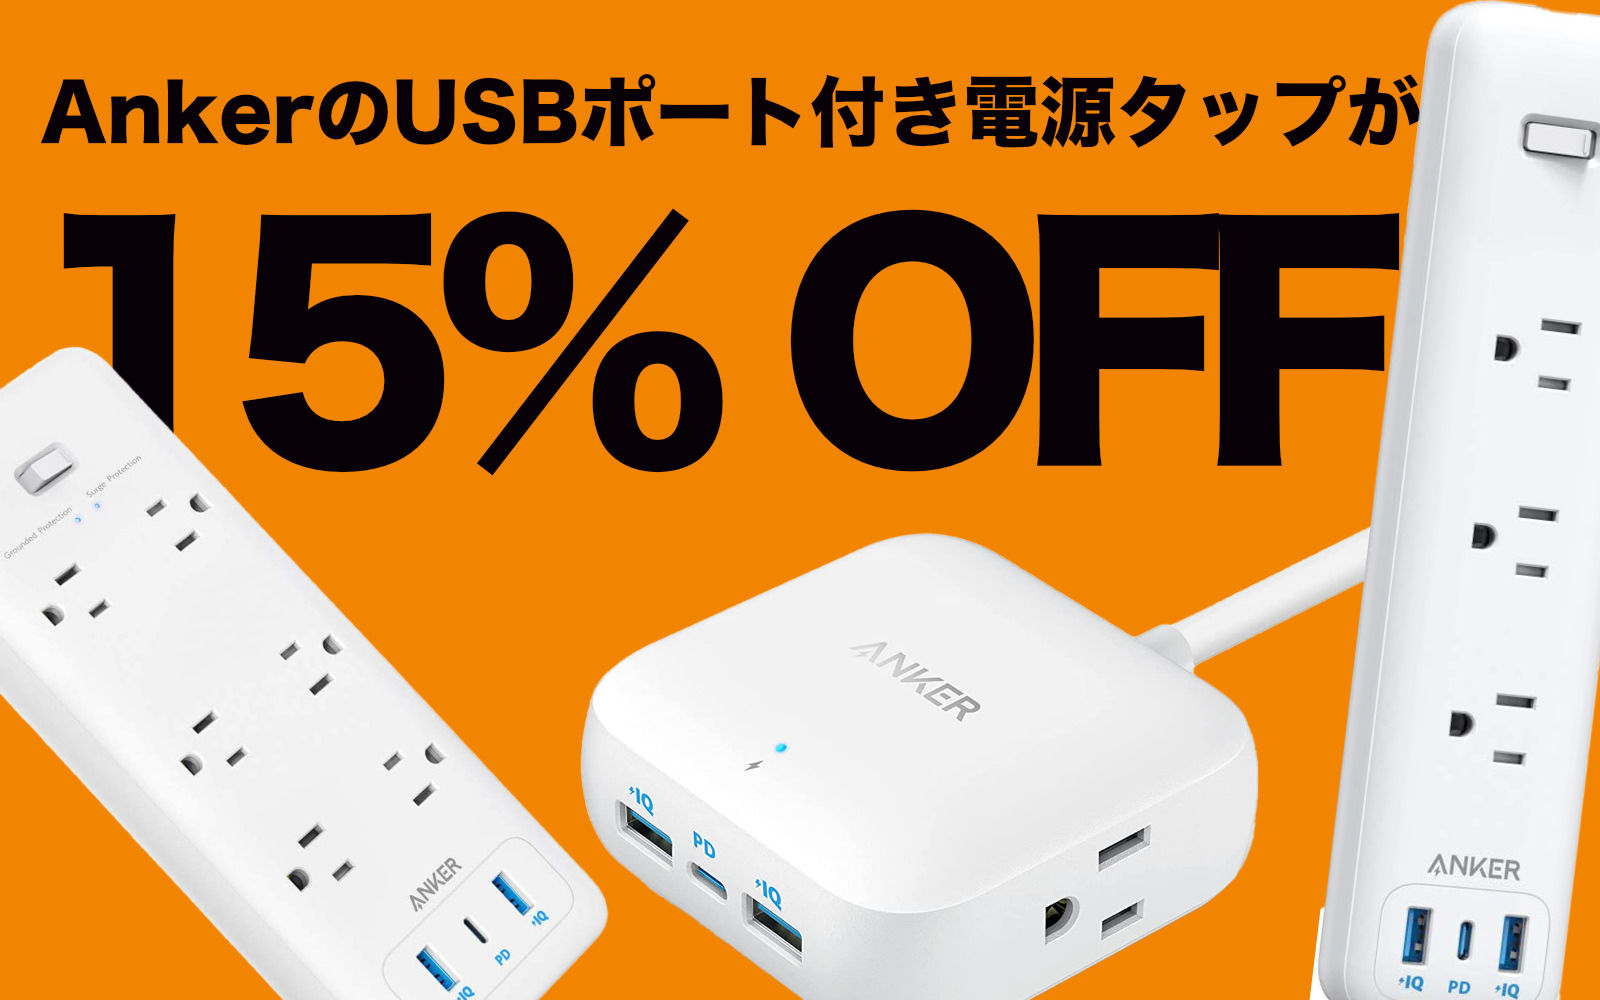 Anker-USB-charger-tap-sale.jpg